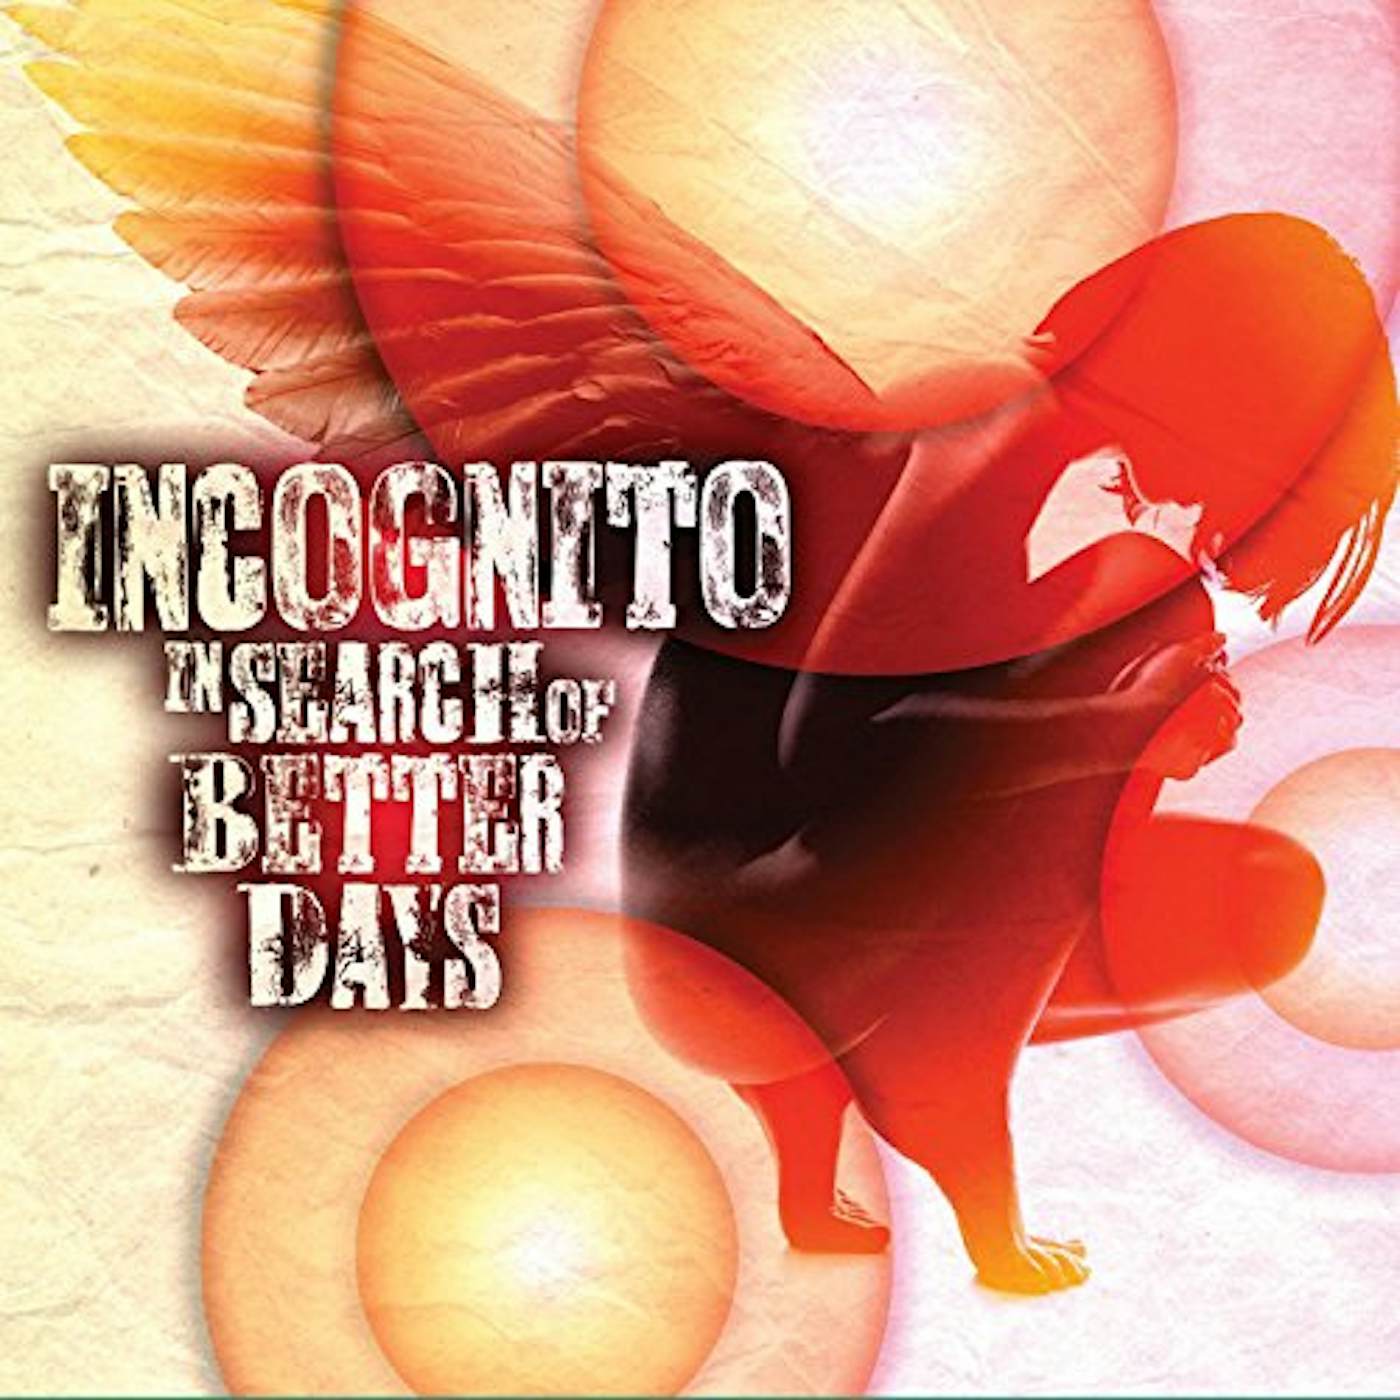 Incognito IN SEARCH OF BETTER DAYS CD